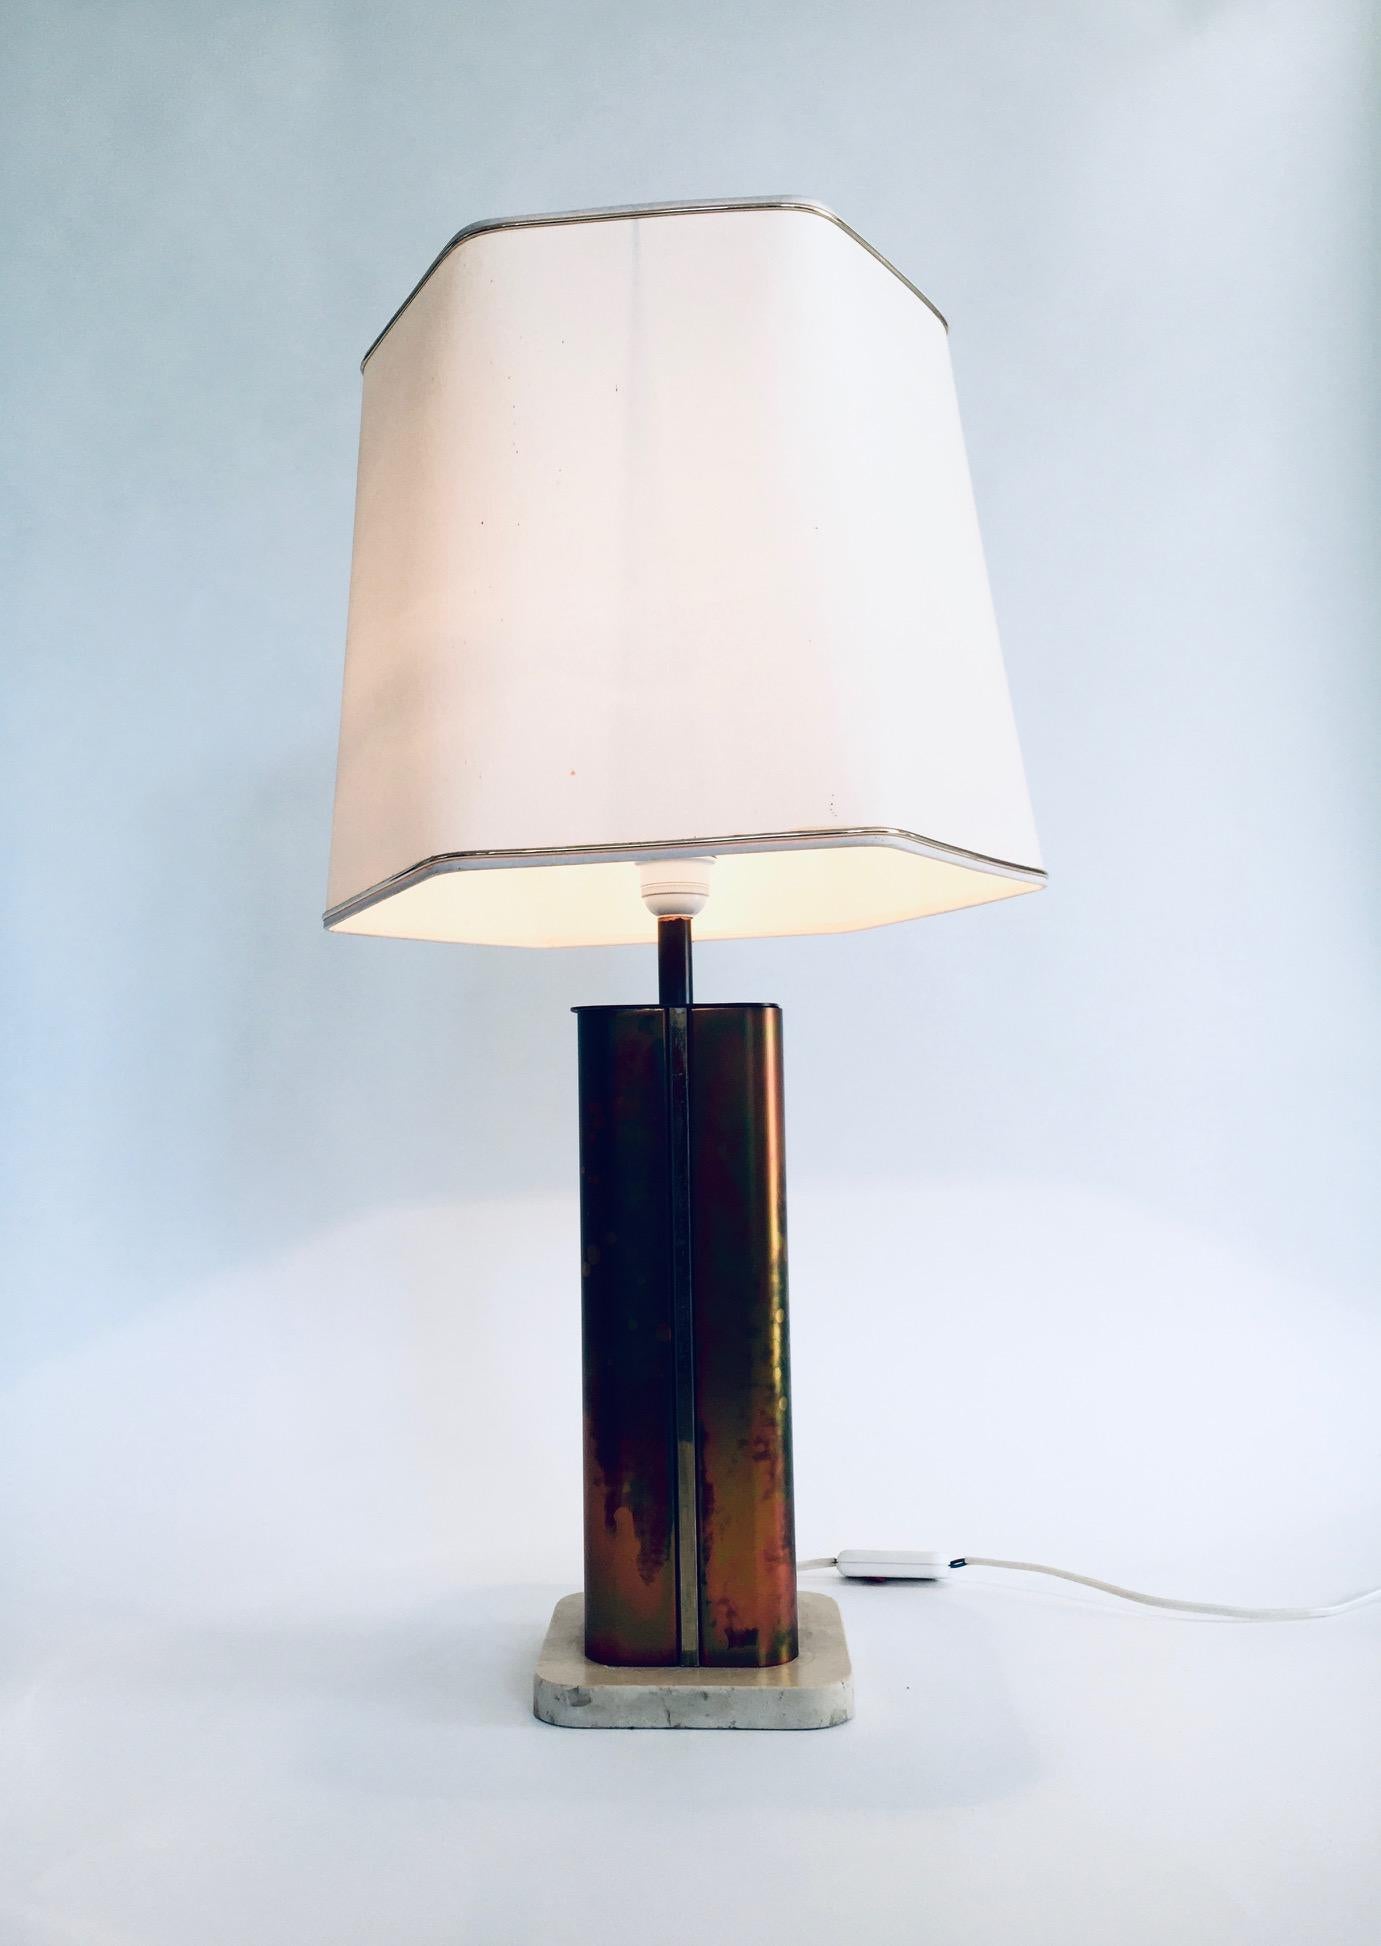 Hollywood Regency Style Design Table Lamp by Fedam, Holland, 1970's For Sale 2